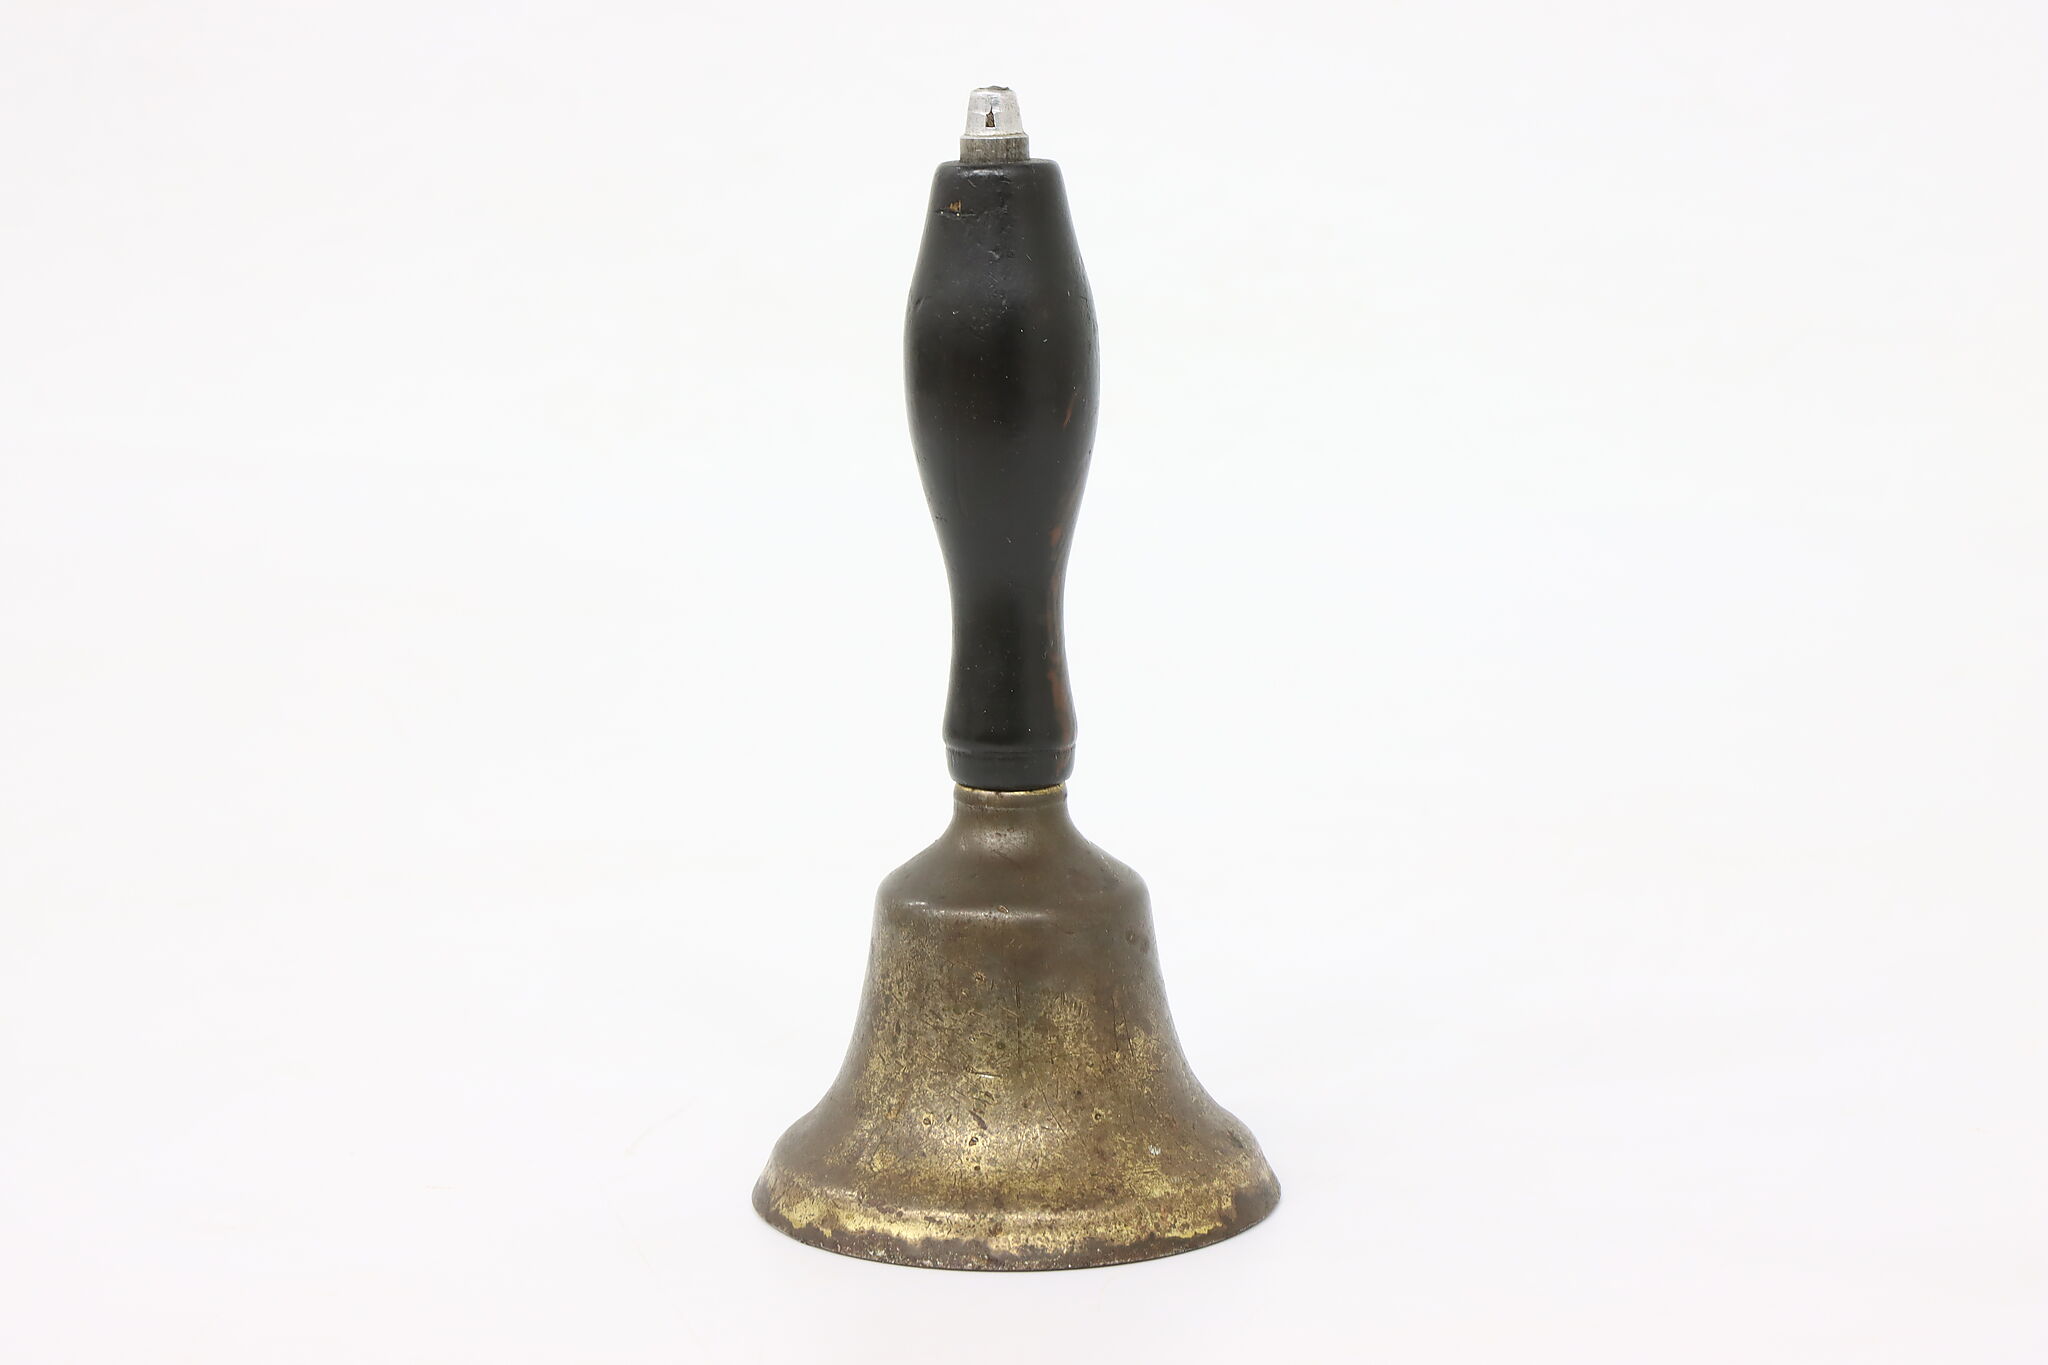 Small Brass Bell with Wooden Handle